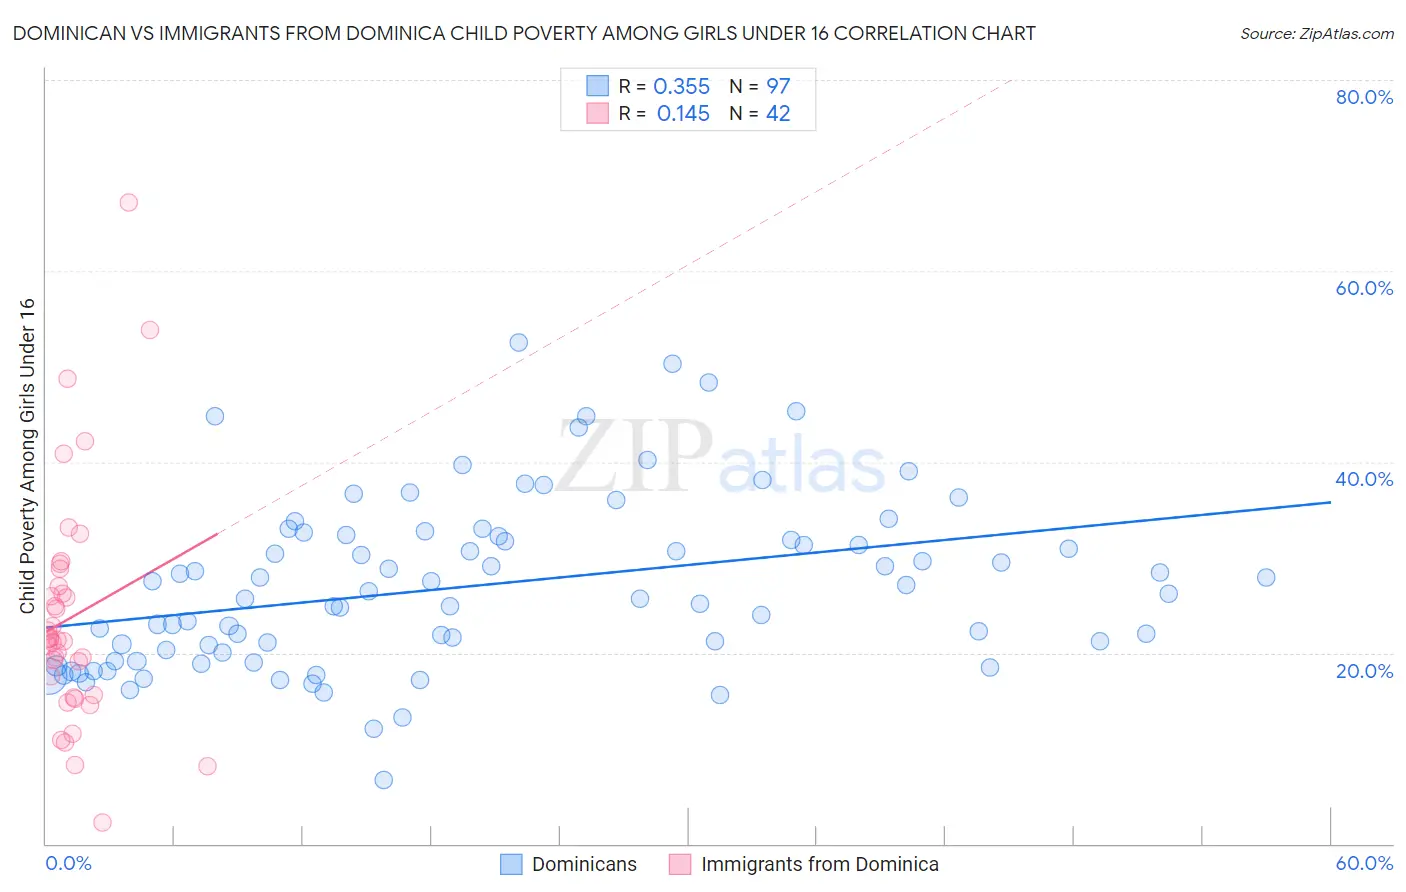 Dominican vs Immigrants from Dominica Child Poverty Among Girls Under 16